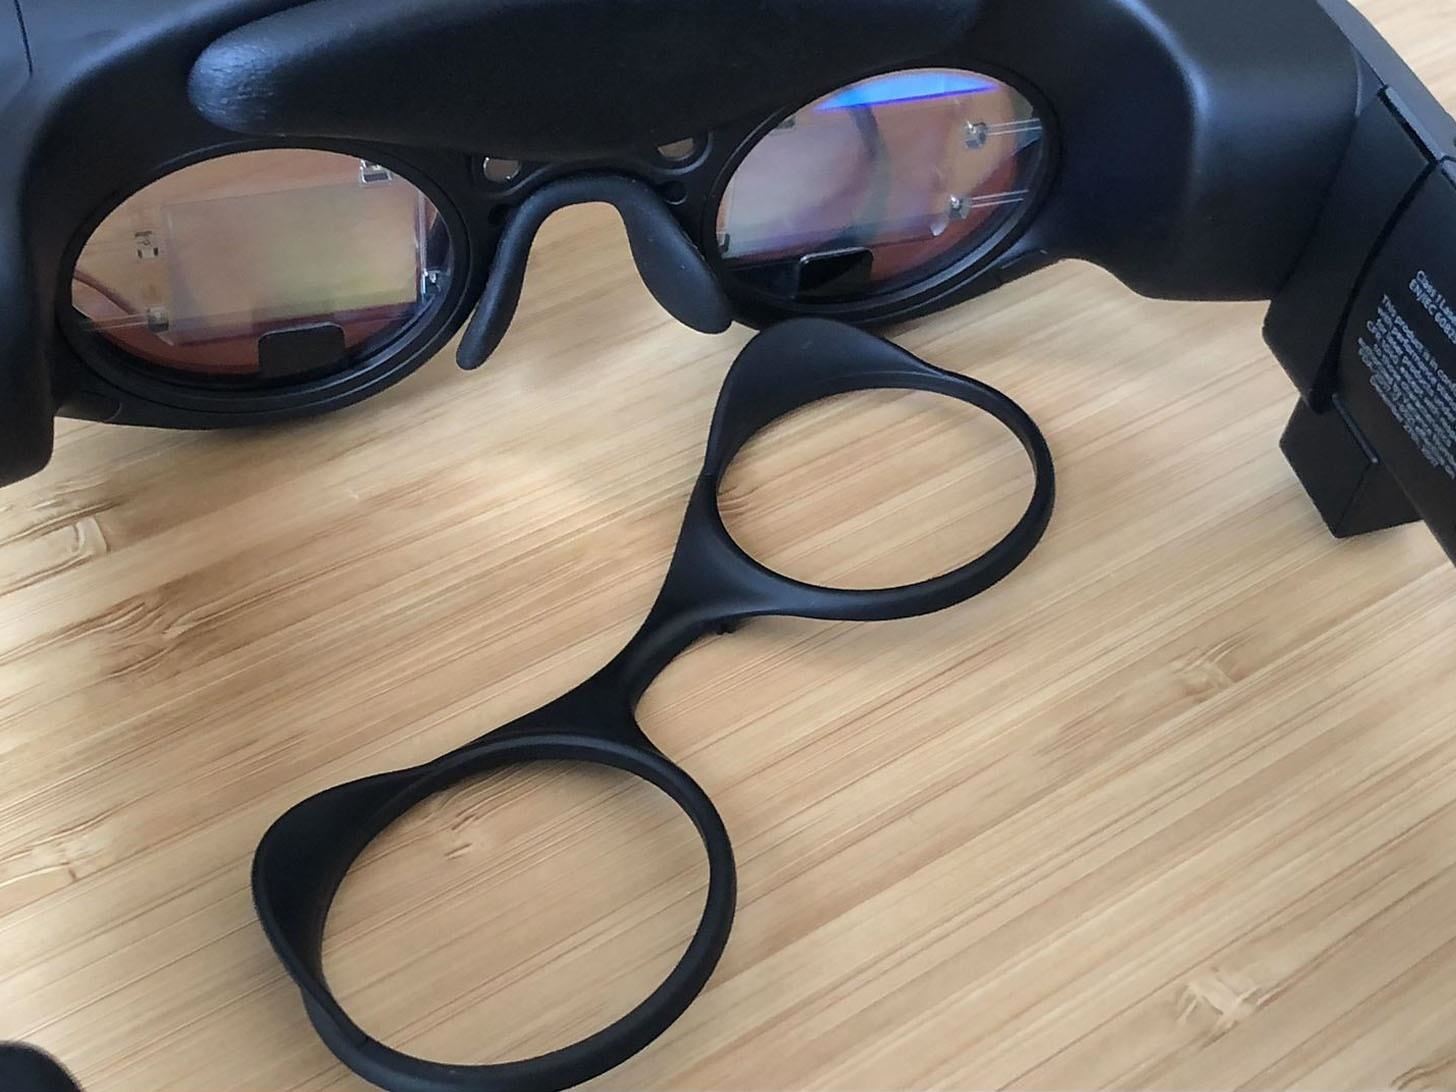 Gallery: A Close-Up Look at the Magic Leap One's Optics